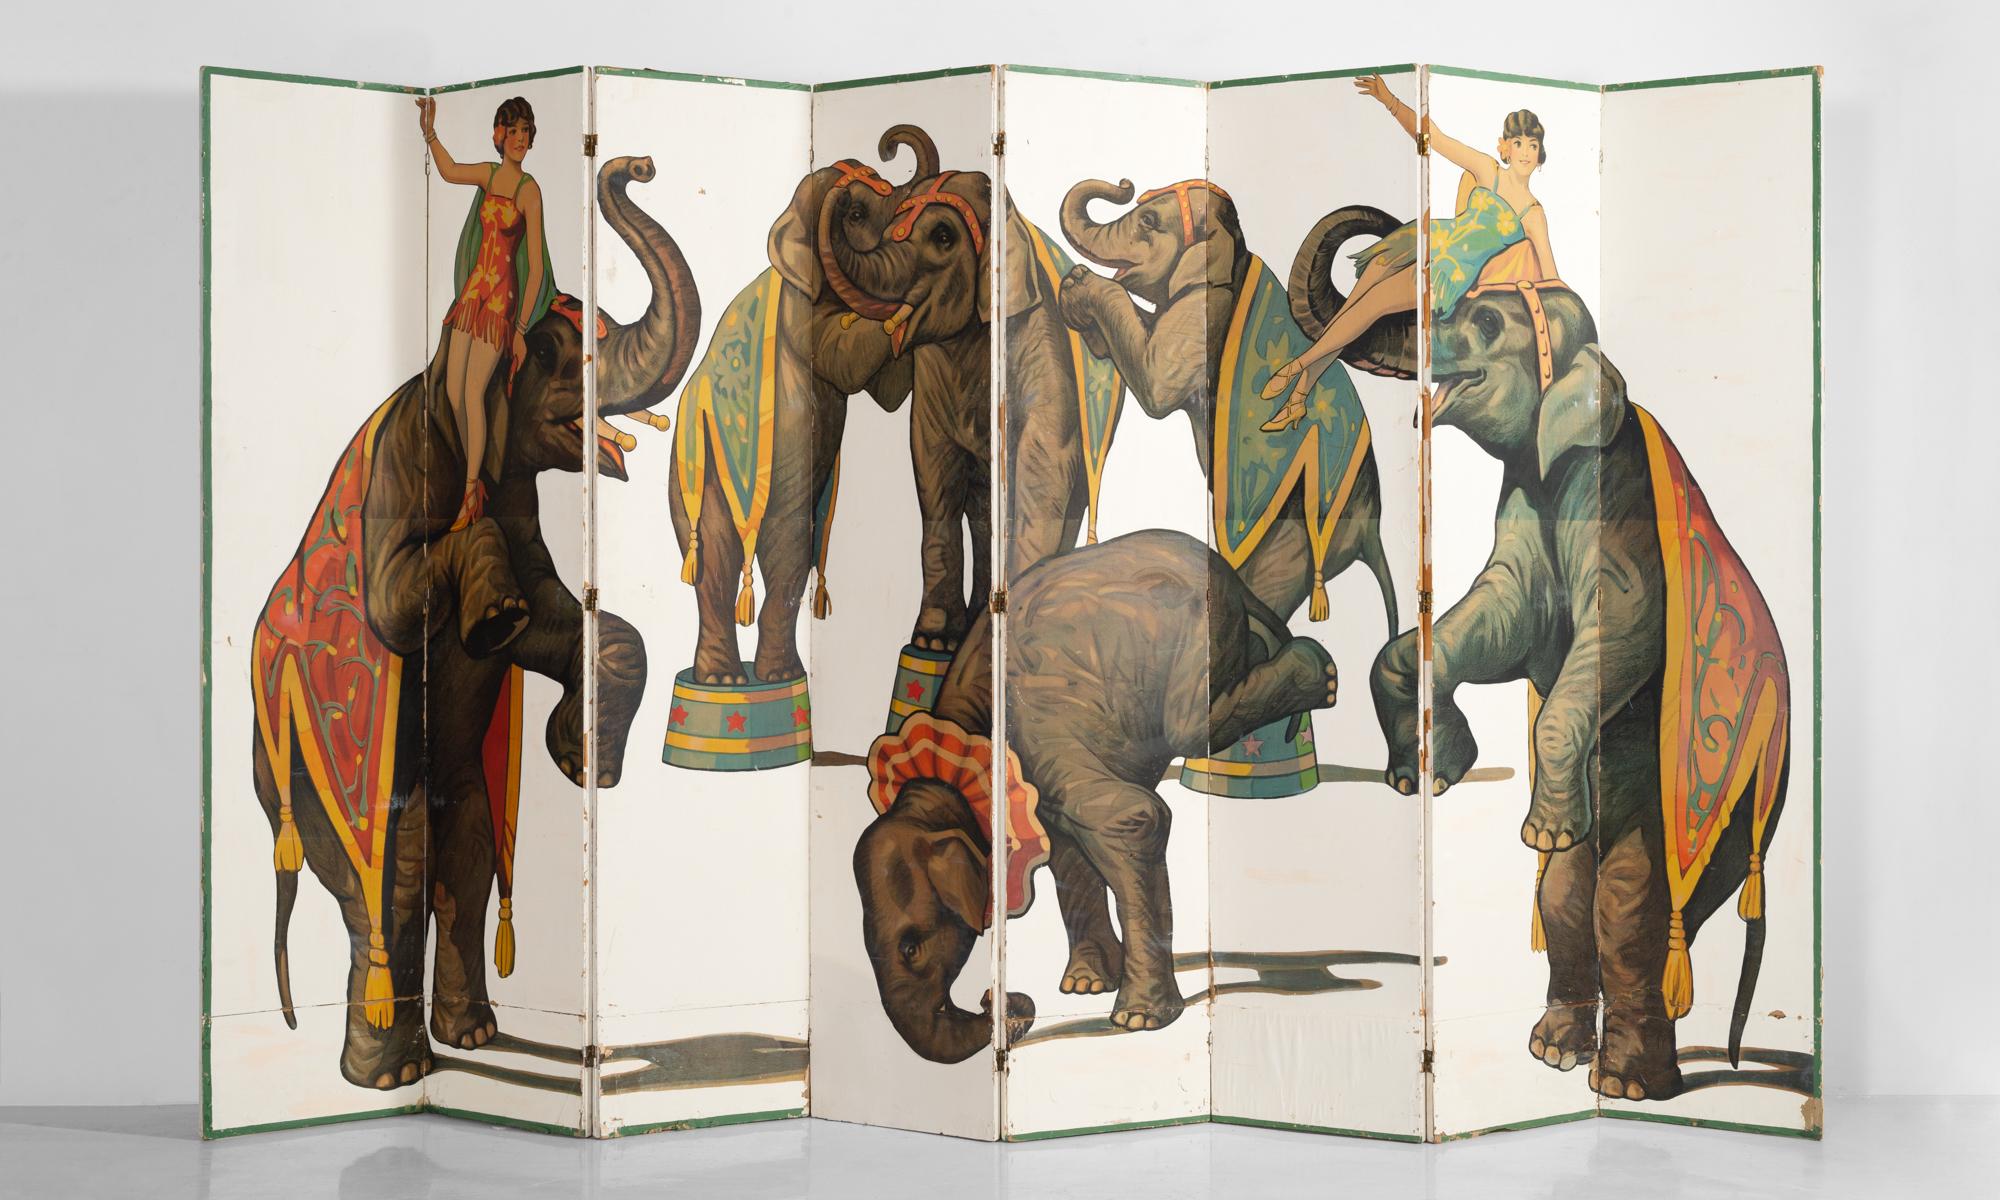 Eight panel printed carnival screen, circa 1940.

Large printed panels reproduce a whimsical, hand-painted scene of elephants and performers. Can be installed on the wall as a painting, or freestanding as a screen.